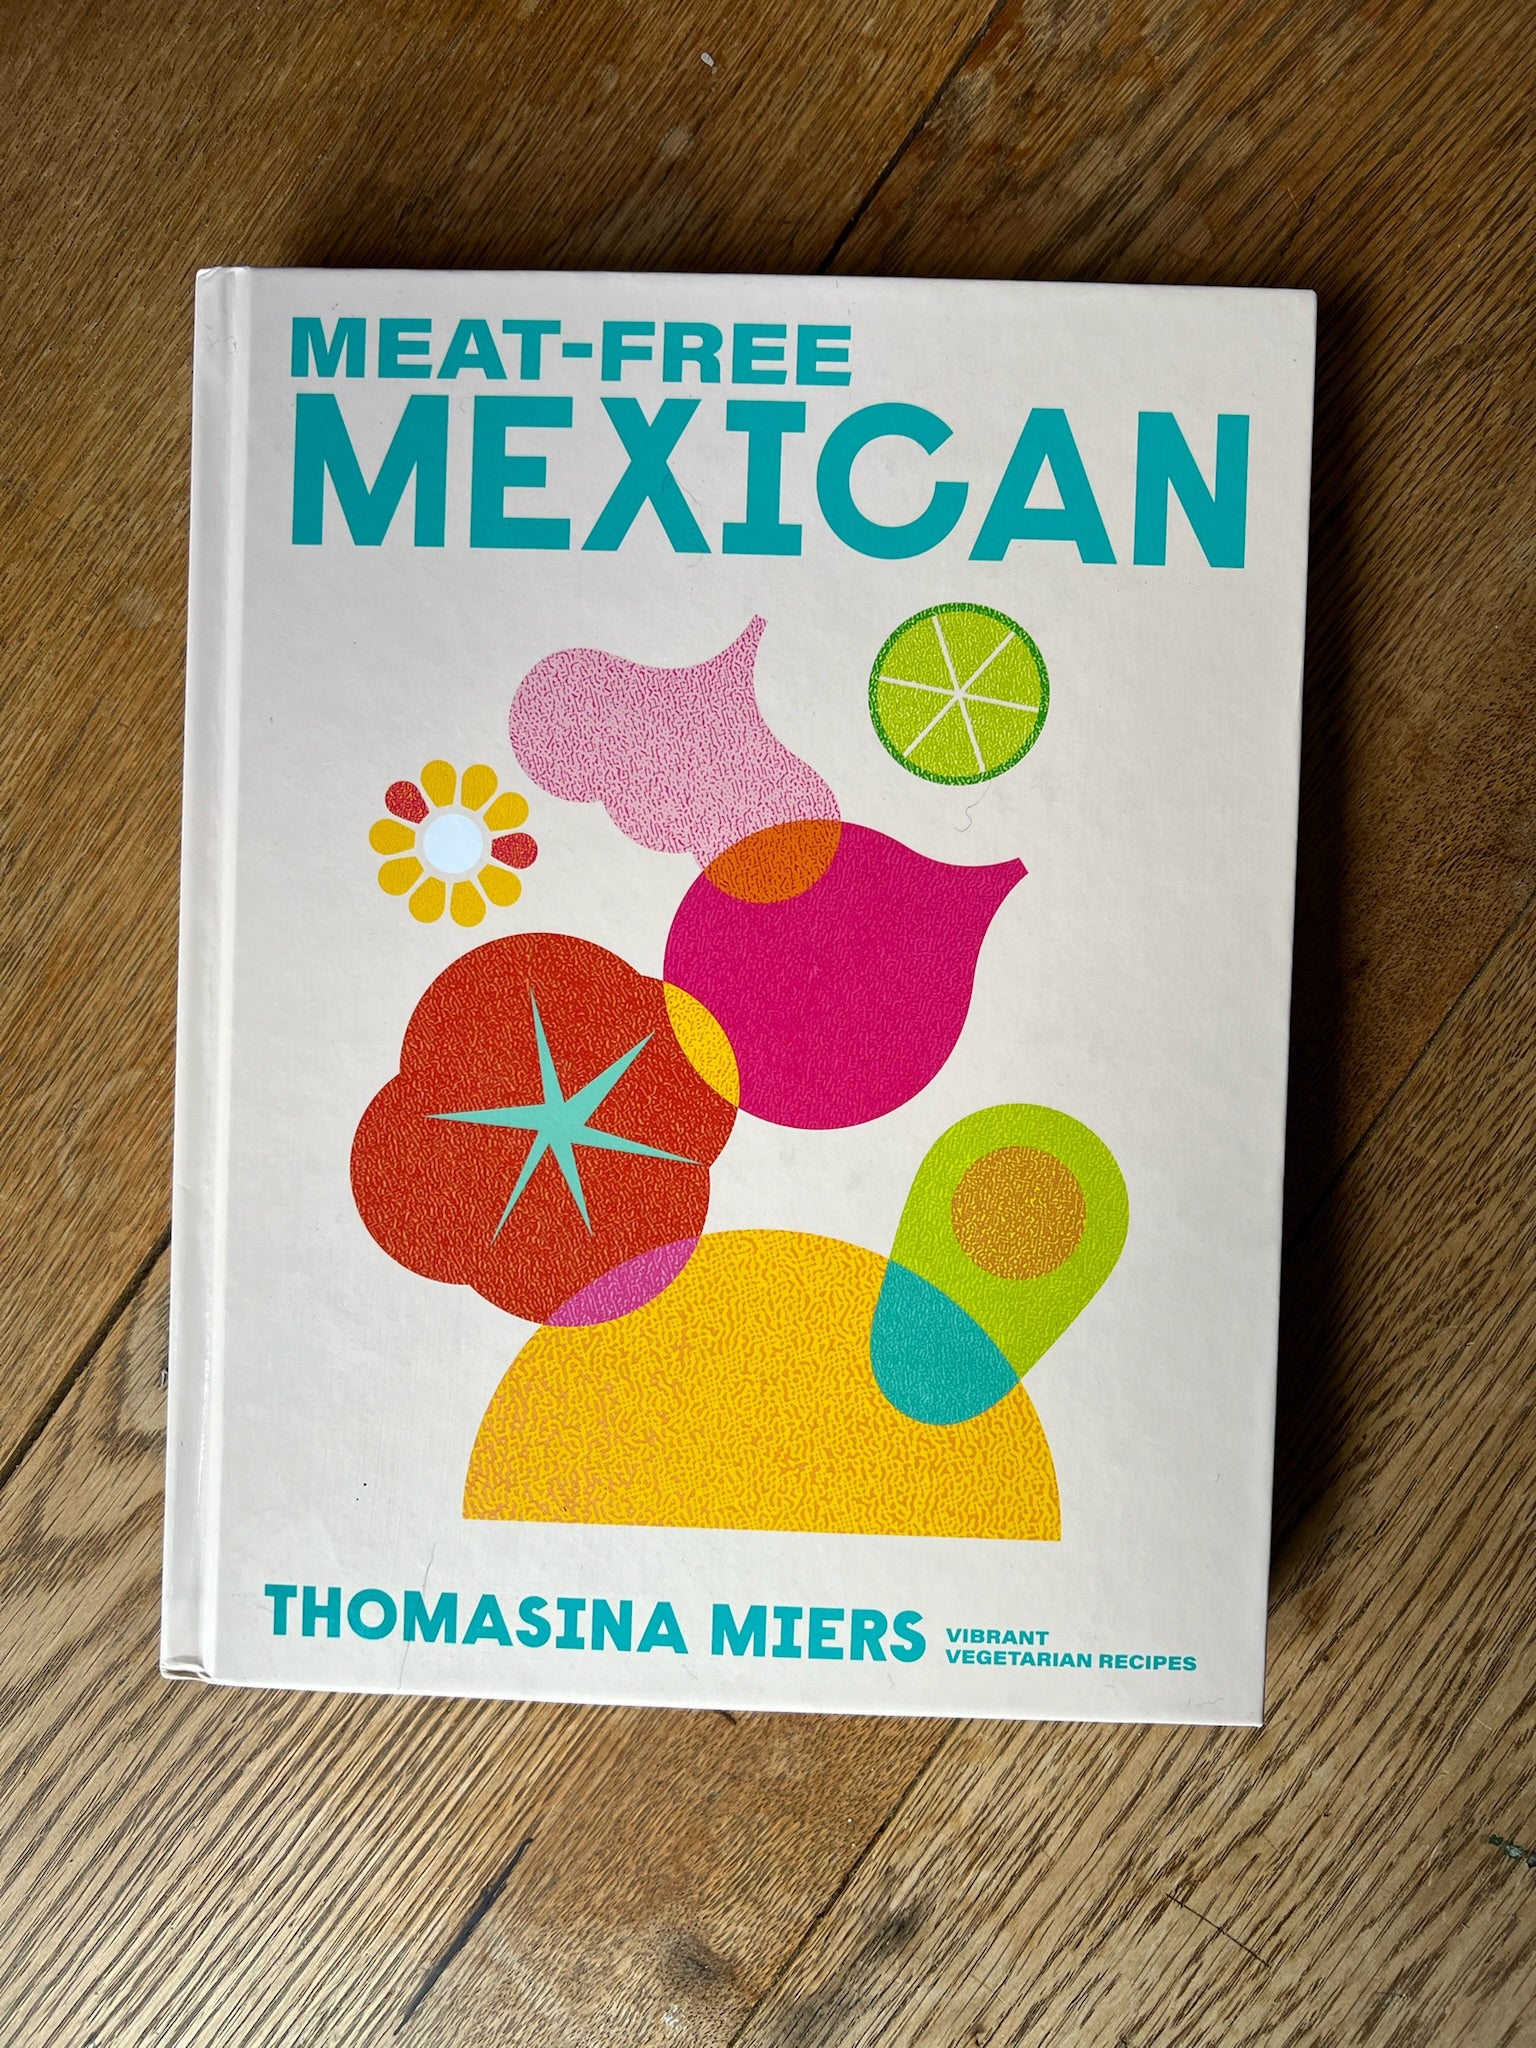 “MEAT FREE MEXICAN” Thomasina Miers